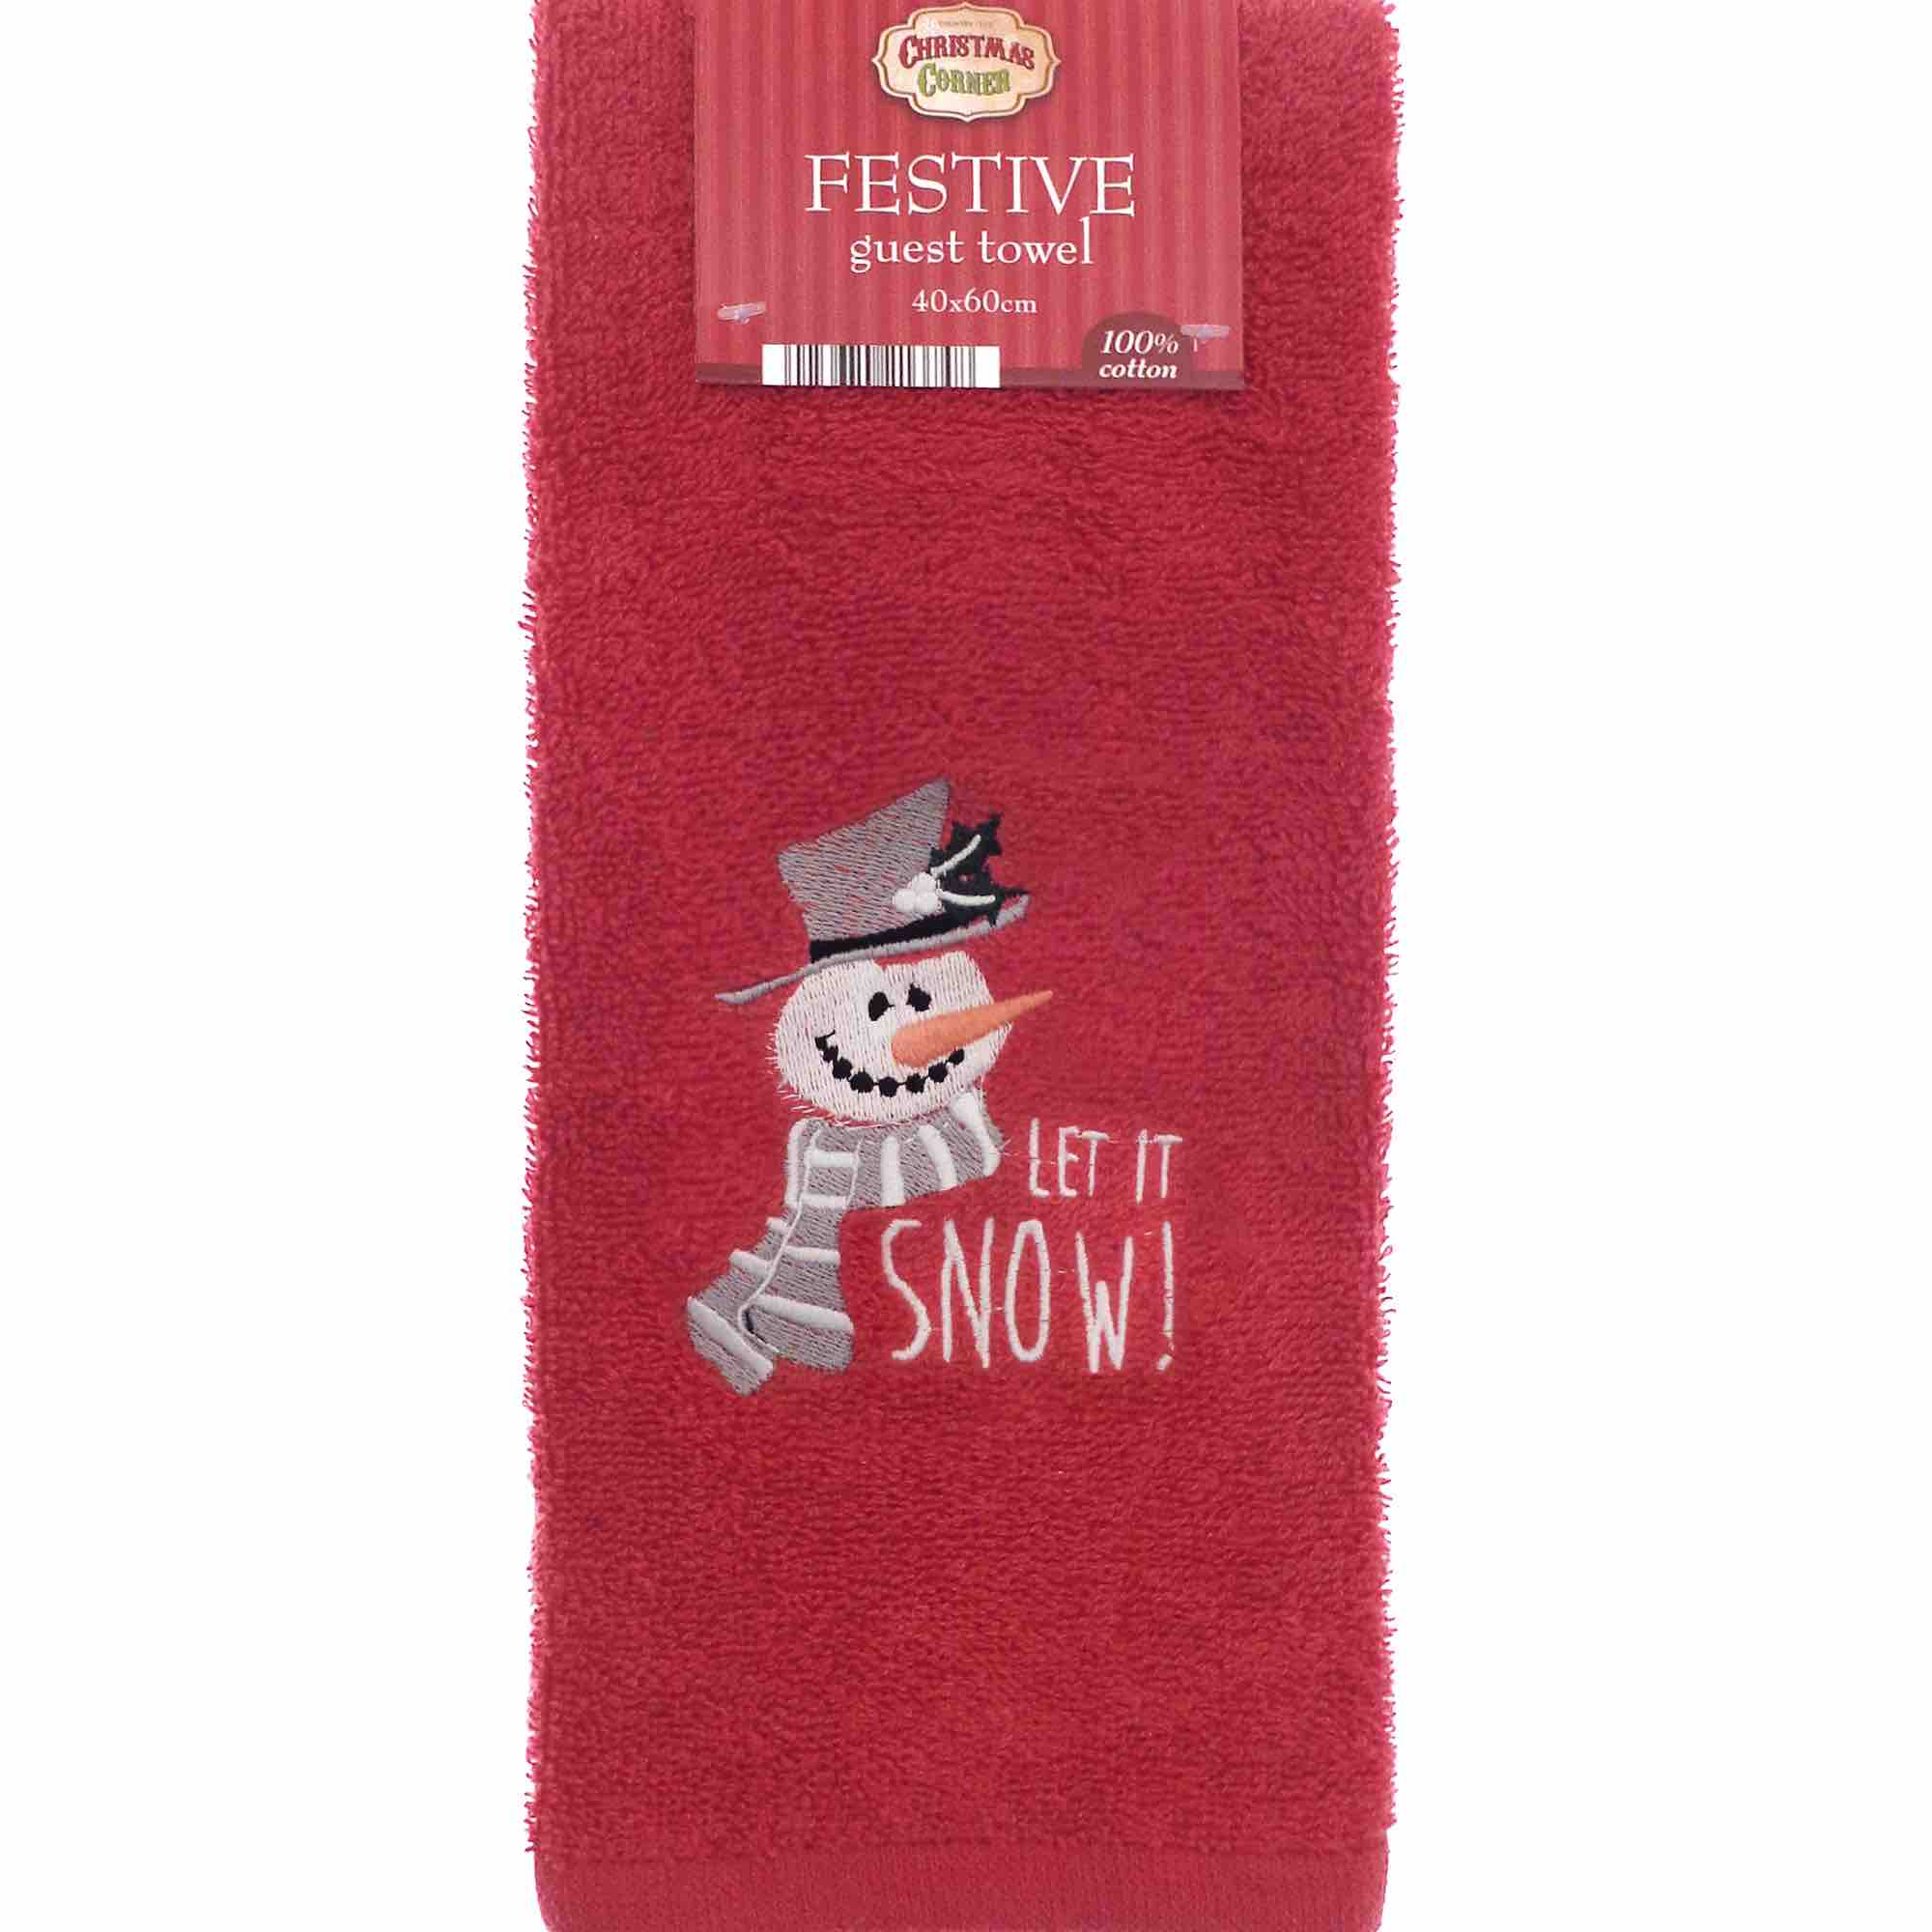 Festive Embroidered Guest Towel